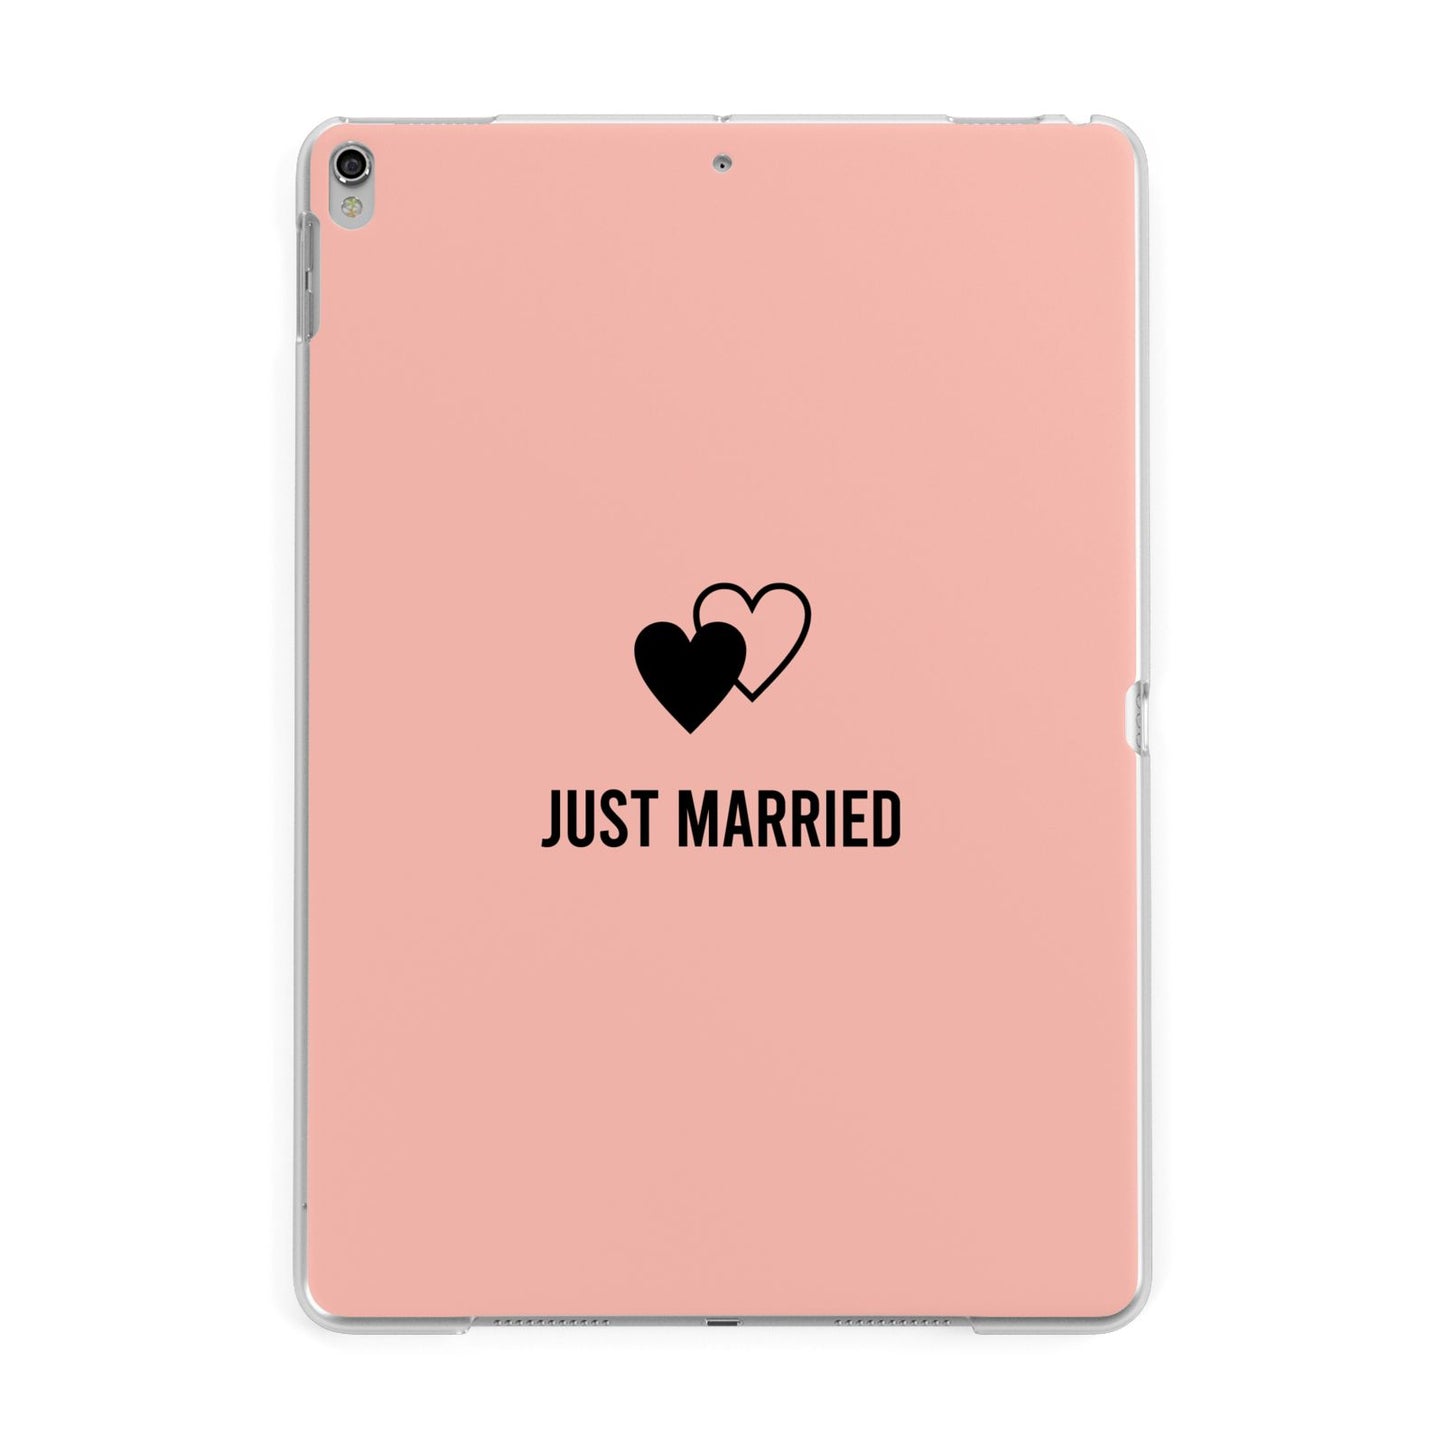 Just Married Apple iPad Silver Case